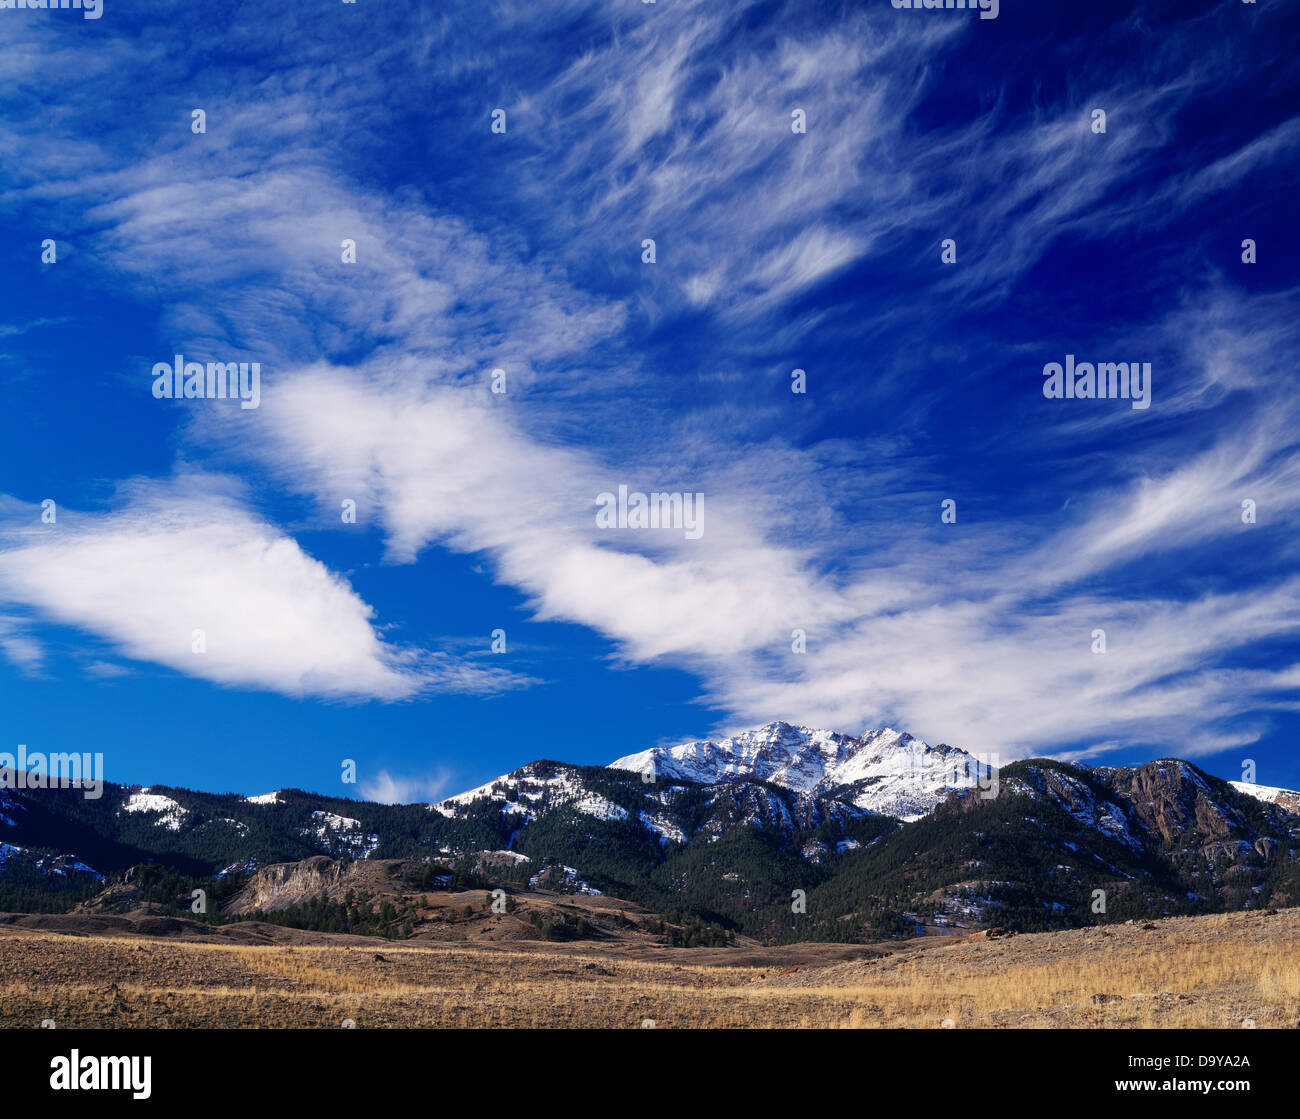 USA, Wyoming, Yellowstone National Park, View of Electric Peak from Between Gardiner and Corwin Springs Stock Photo